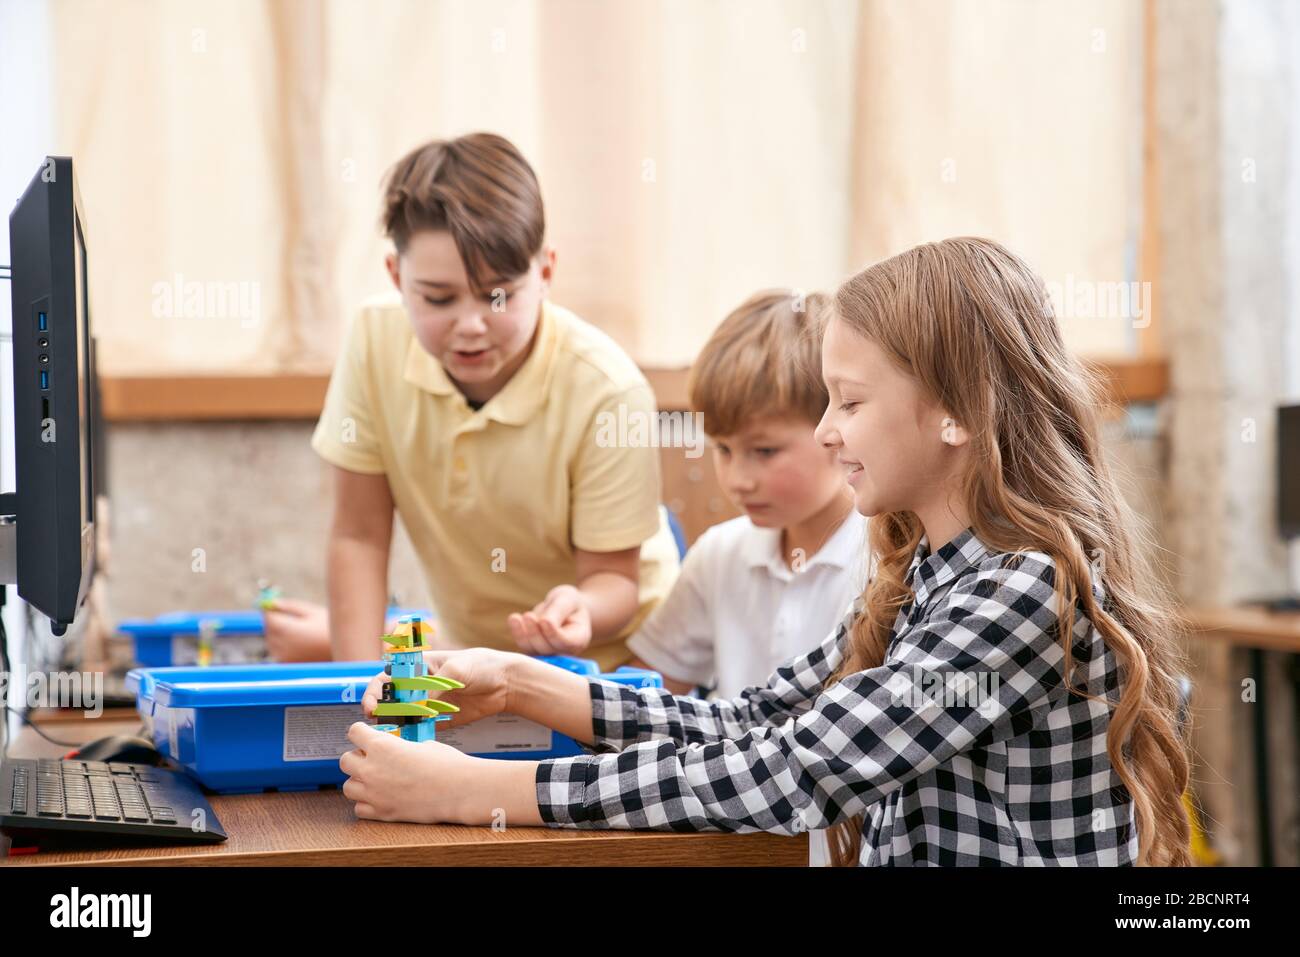 Interesting building kit for kids on table with computers. Side view of boys and girl creating toys. Science engineering. Nice interested friends chat Stock Photo